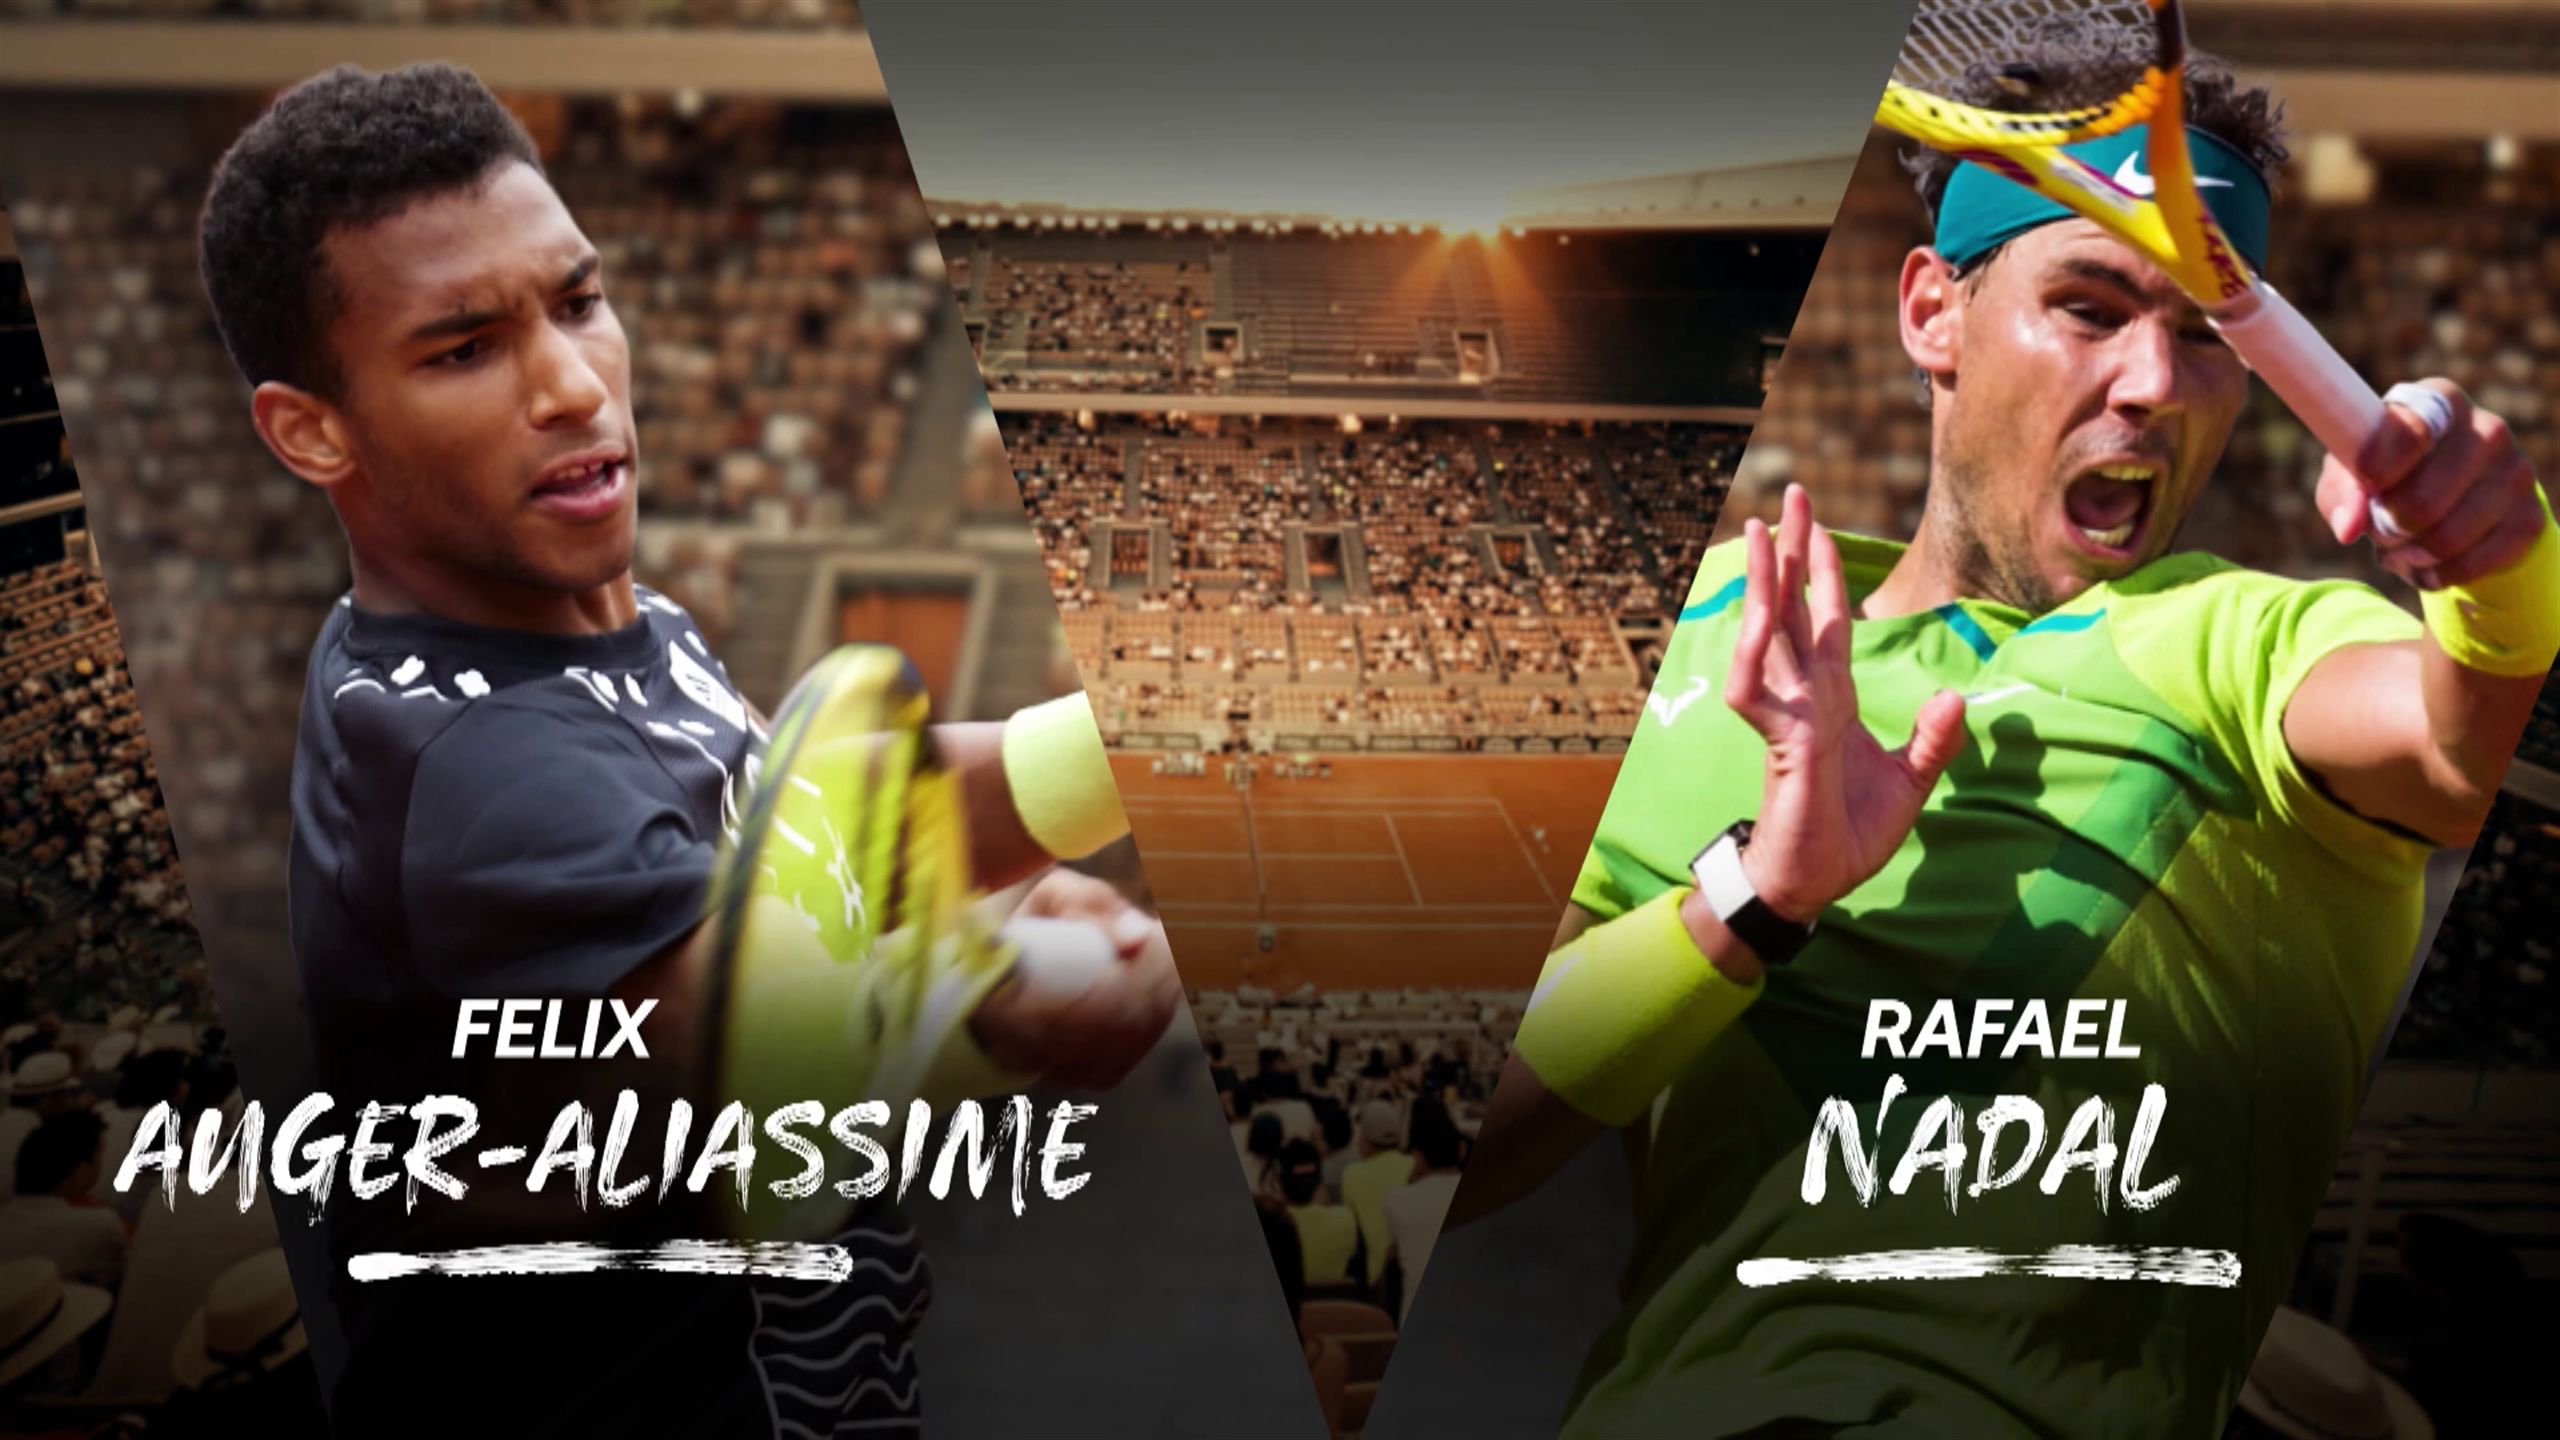 French Open preview Rafael Nadal v Felix Auger-Aliassime - stars ready for epic duel at Roland-Garros - Tennis video